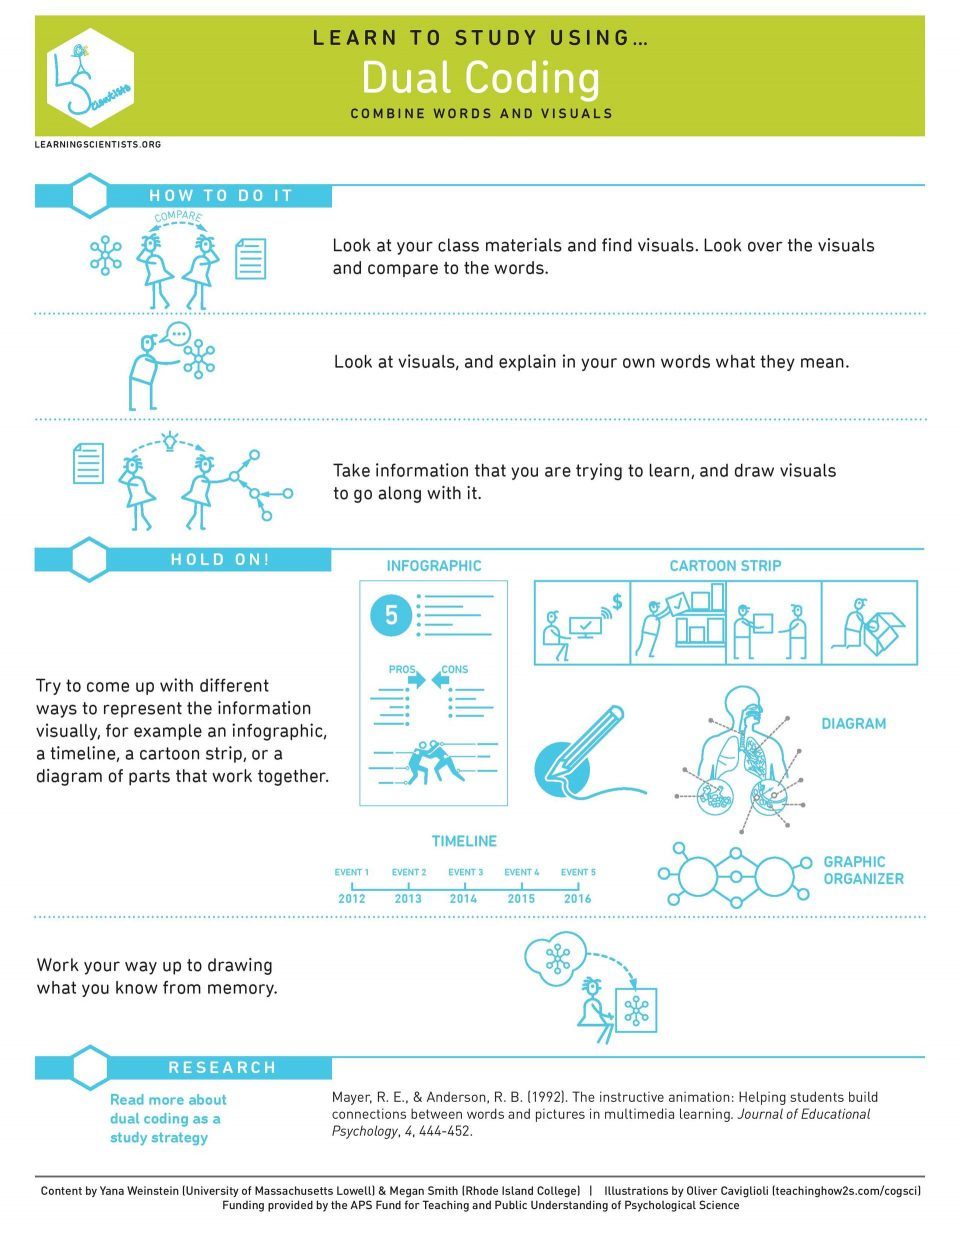 How to Study Using Dual Coding Infographic